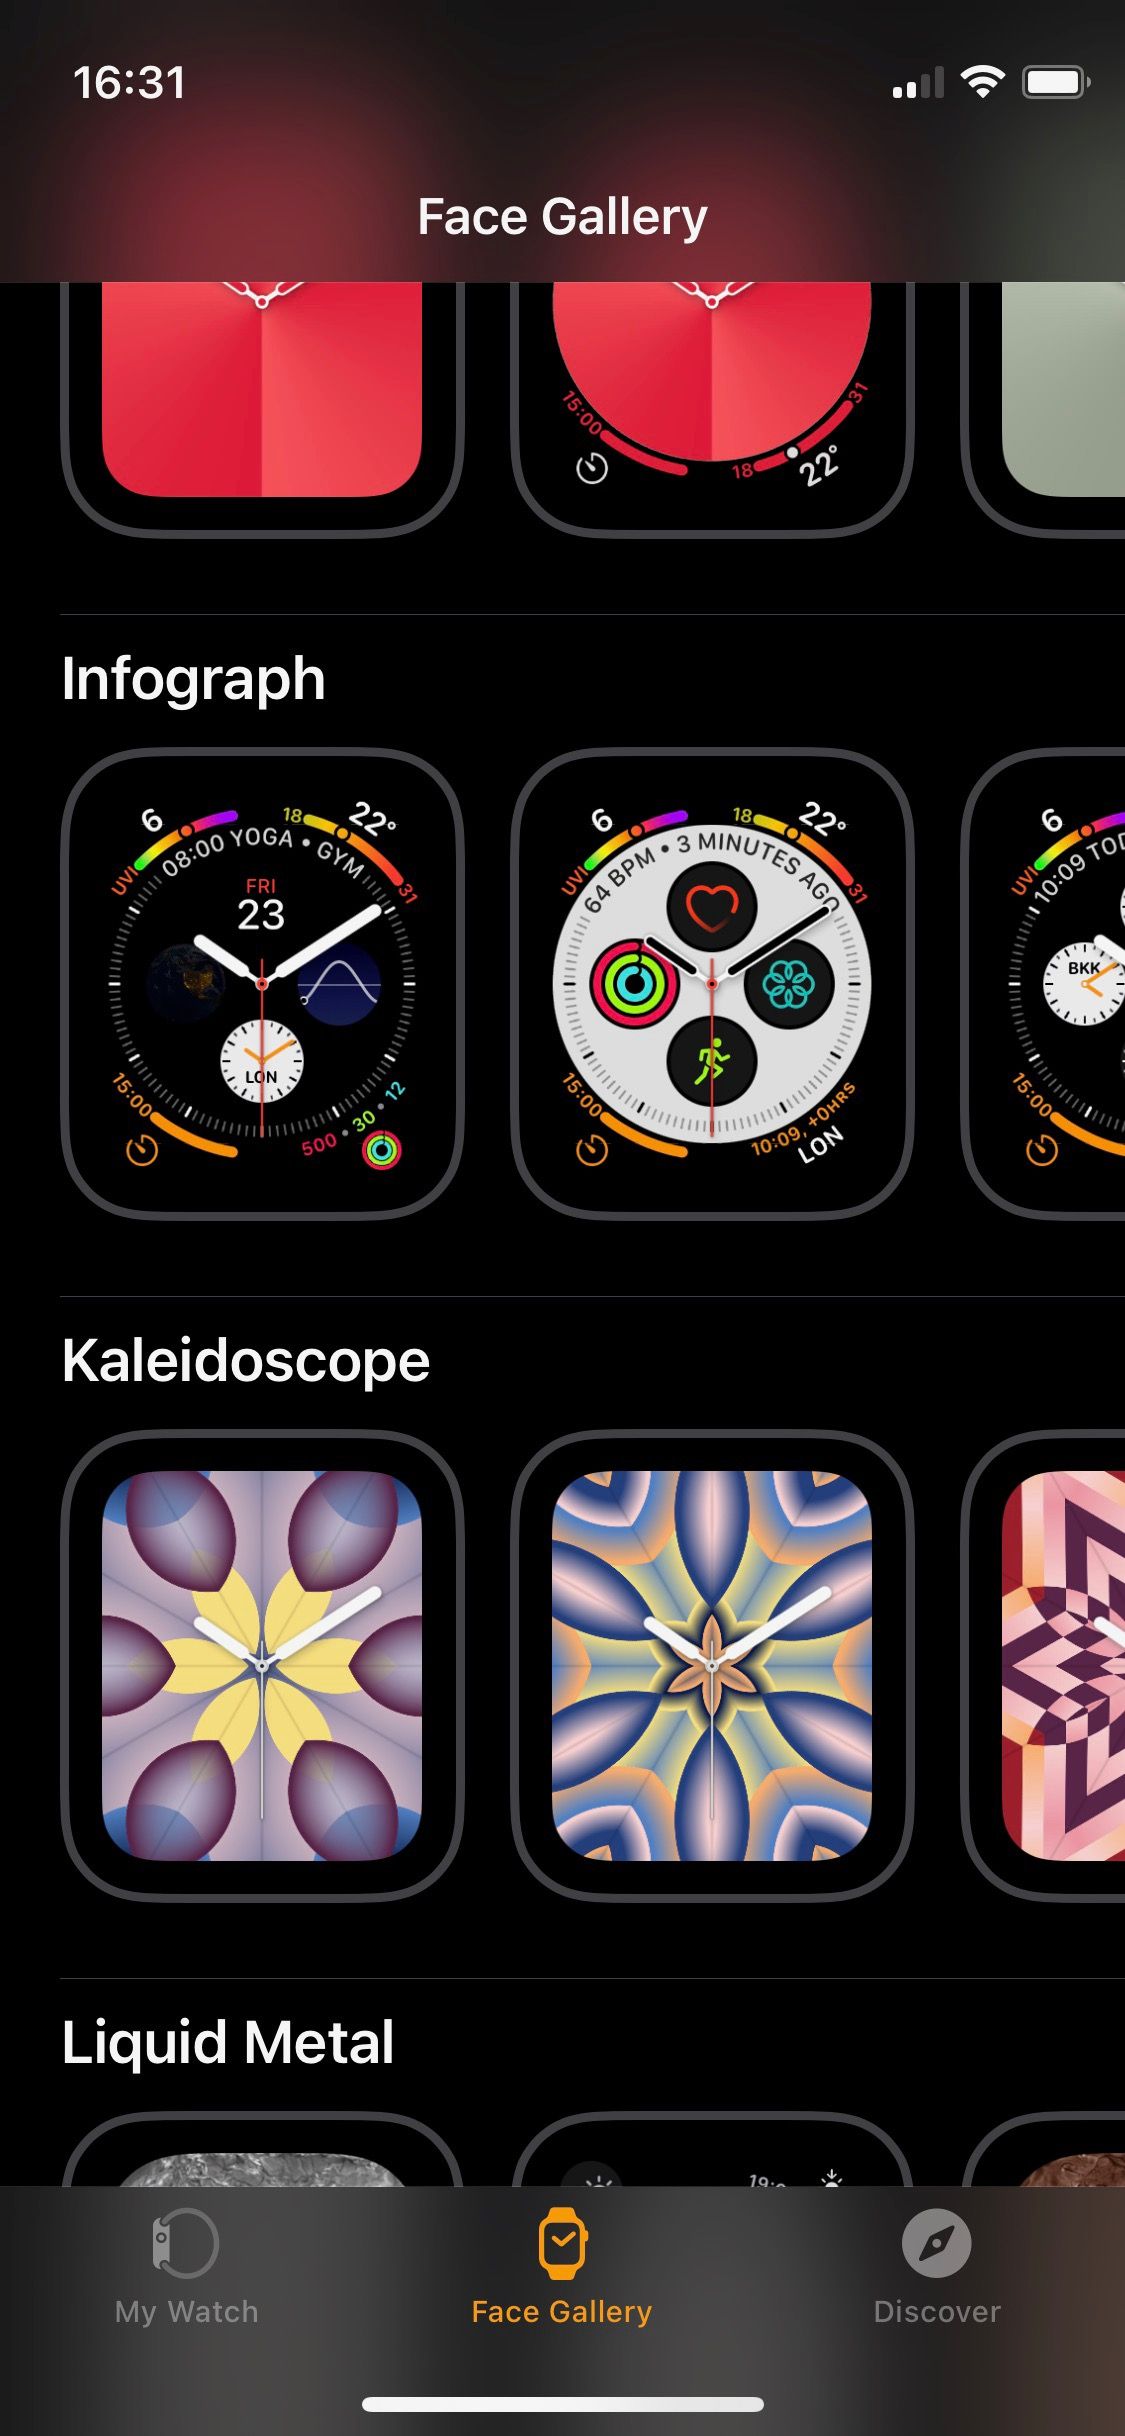 Screenshot of Apple Watch iPhone app showing Infographic Face in Face Gallery